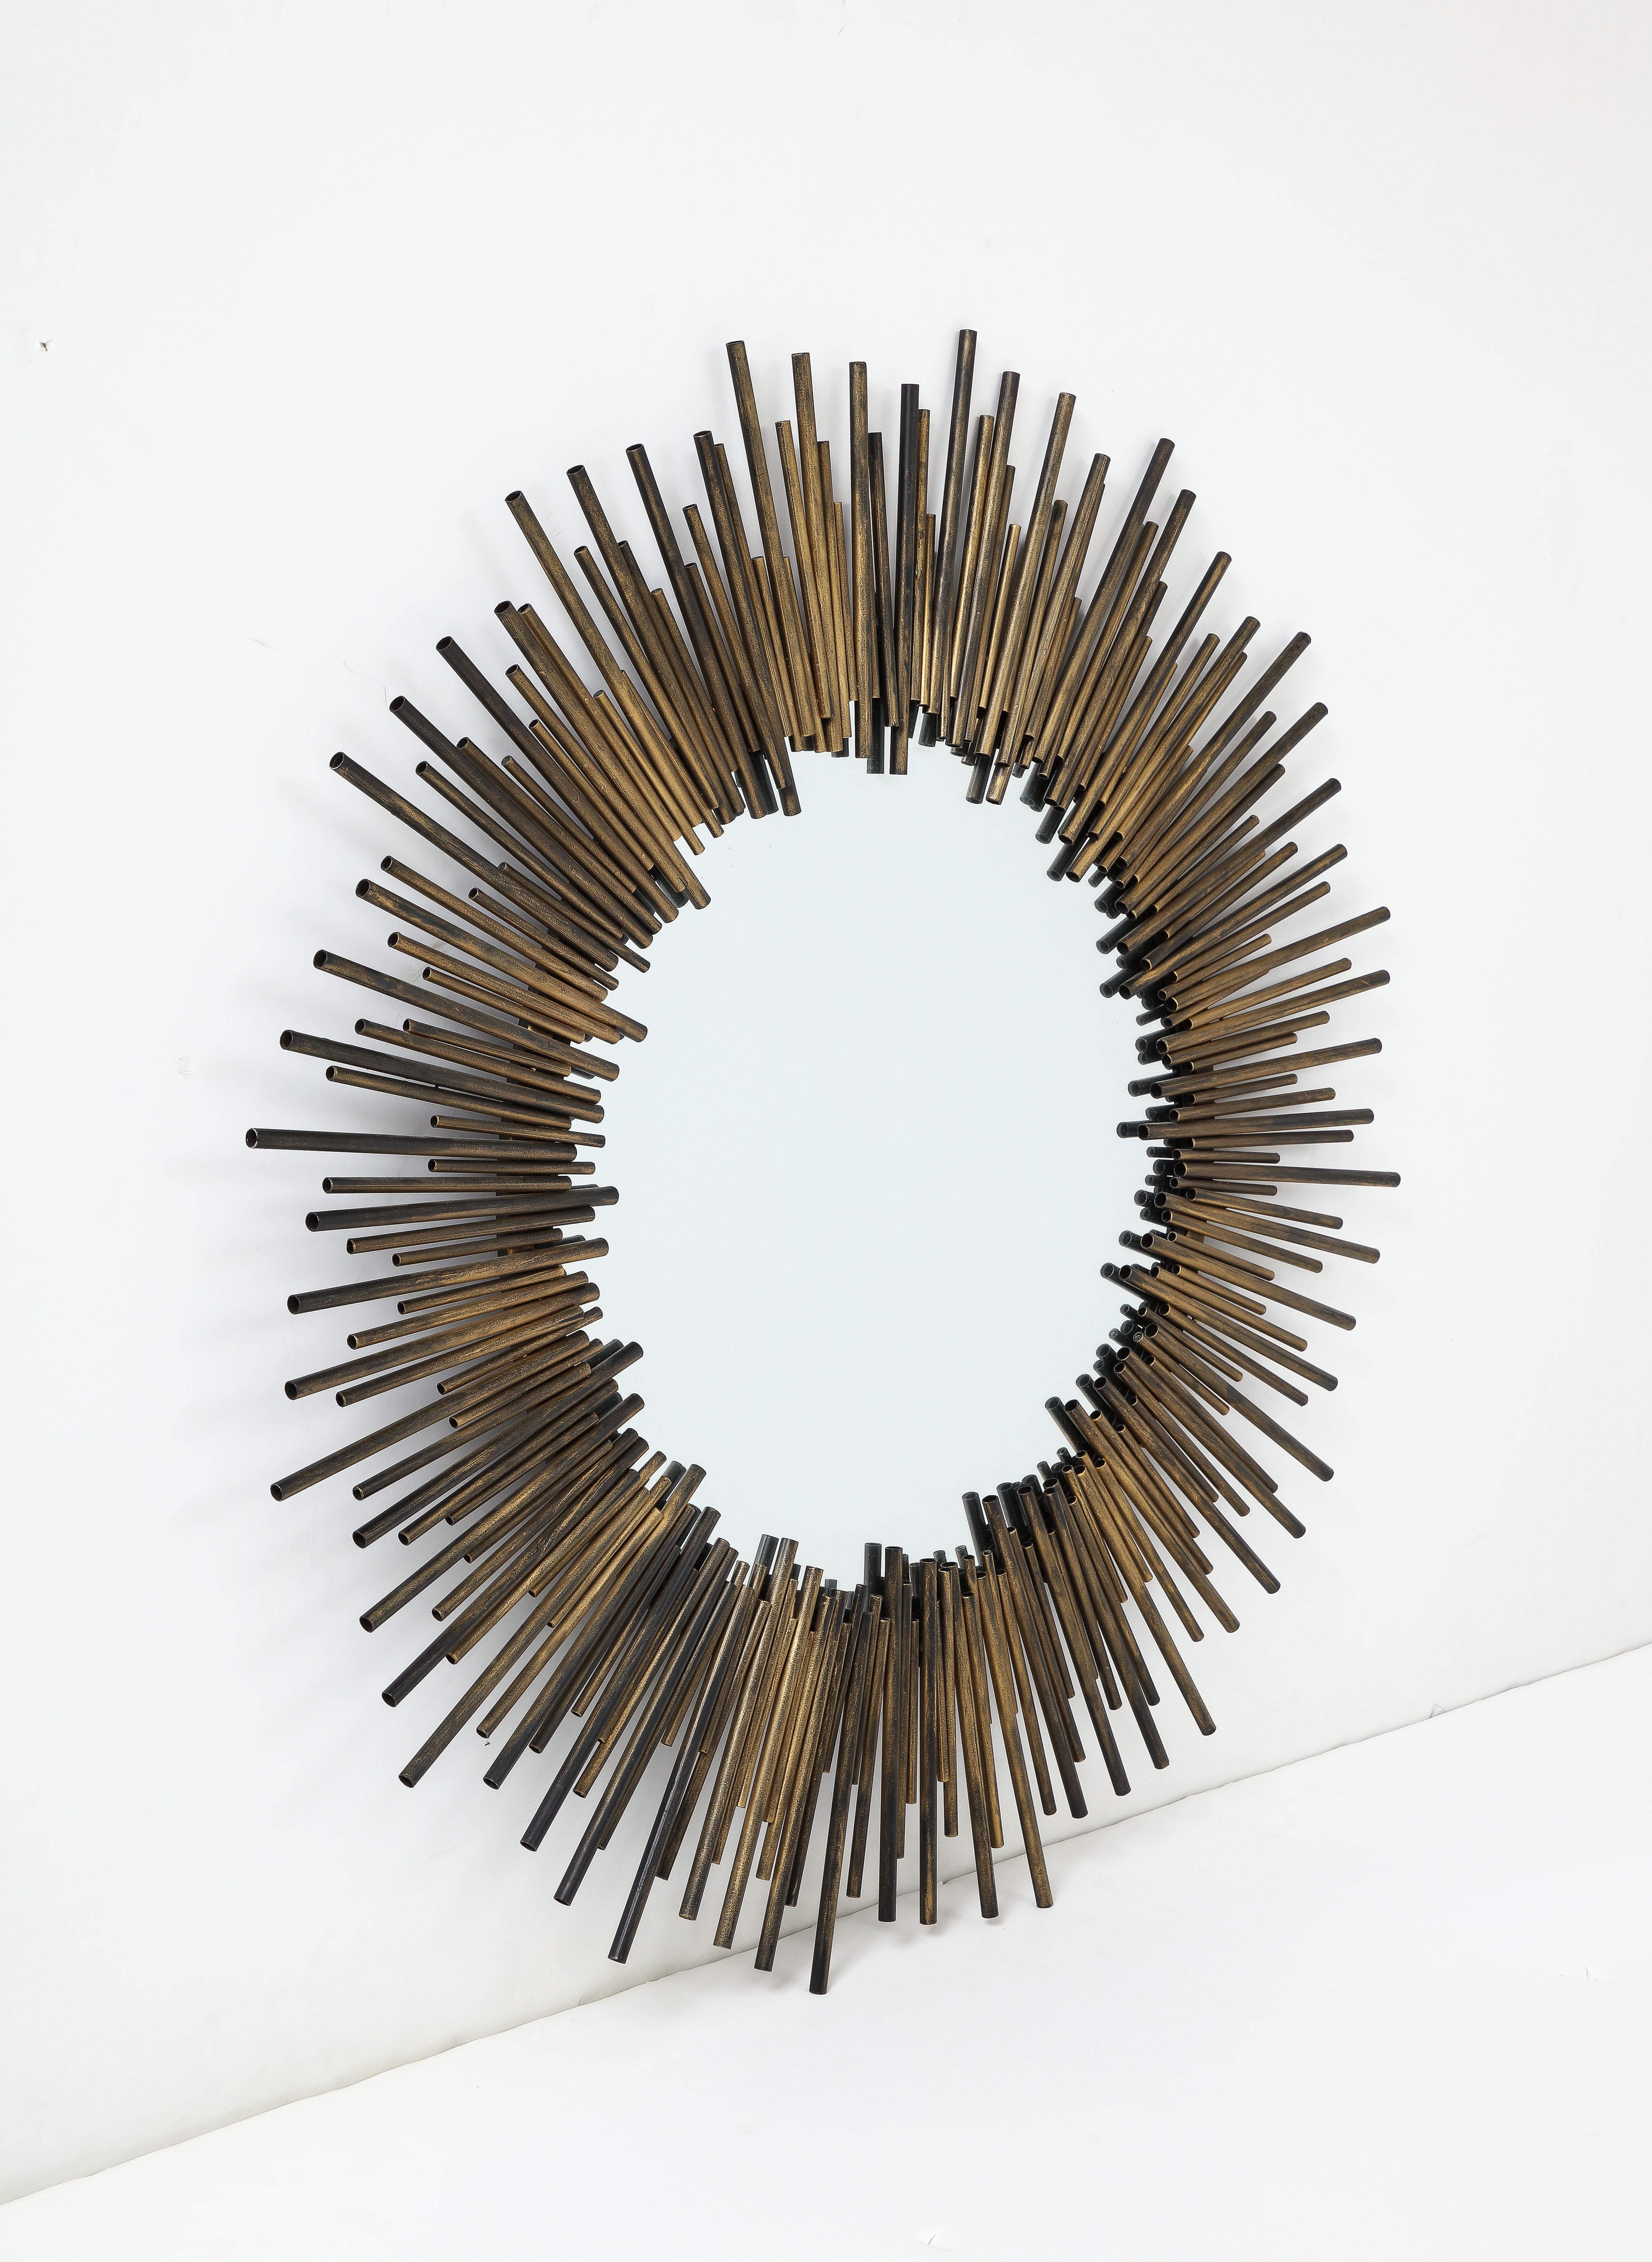 Modernist starburst mirror featuring a border made from hand welded brass and bronze tubes in varying lengths surrounding the center mirror panel.